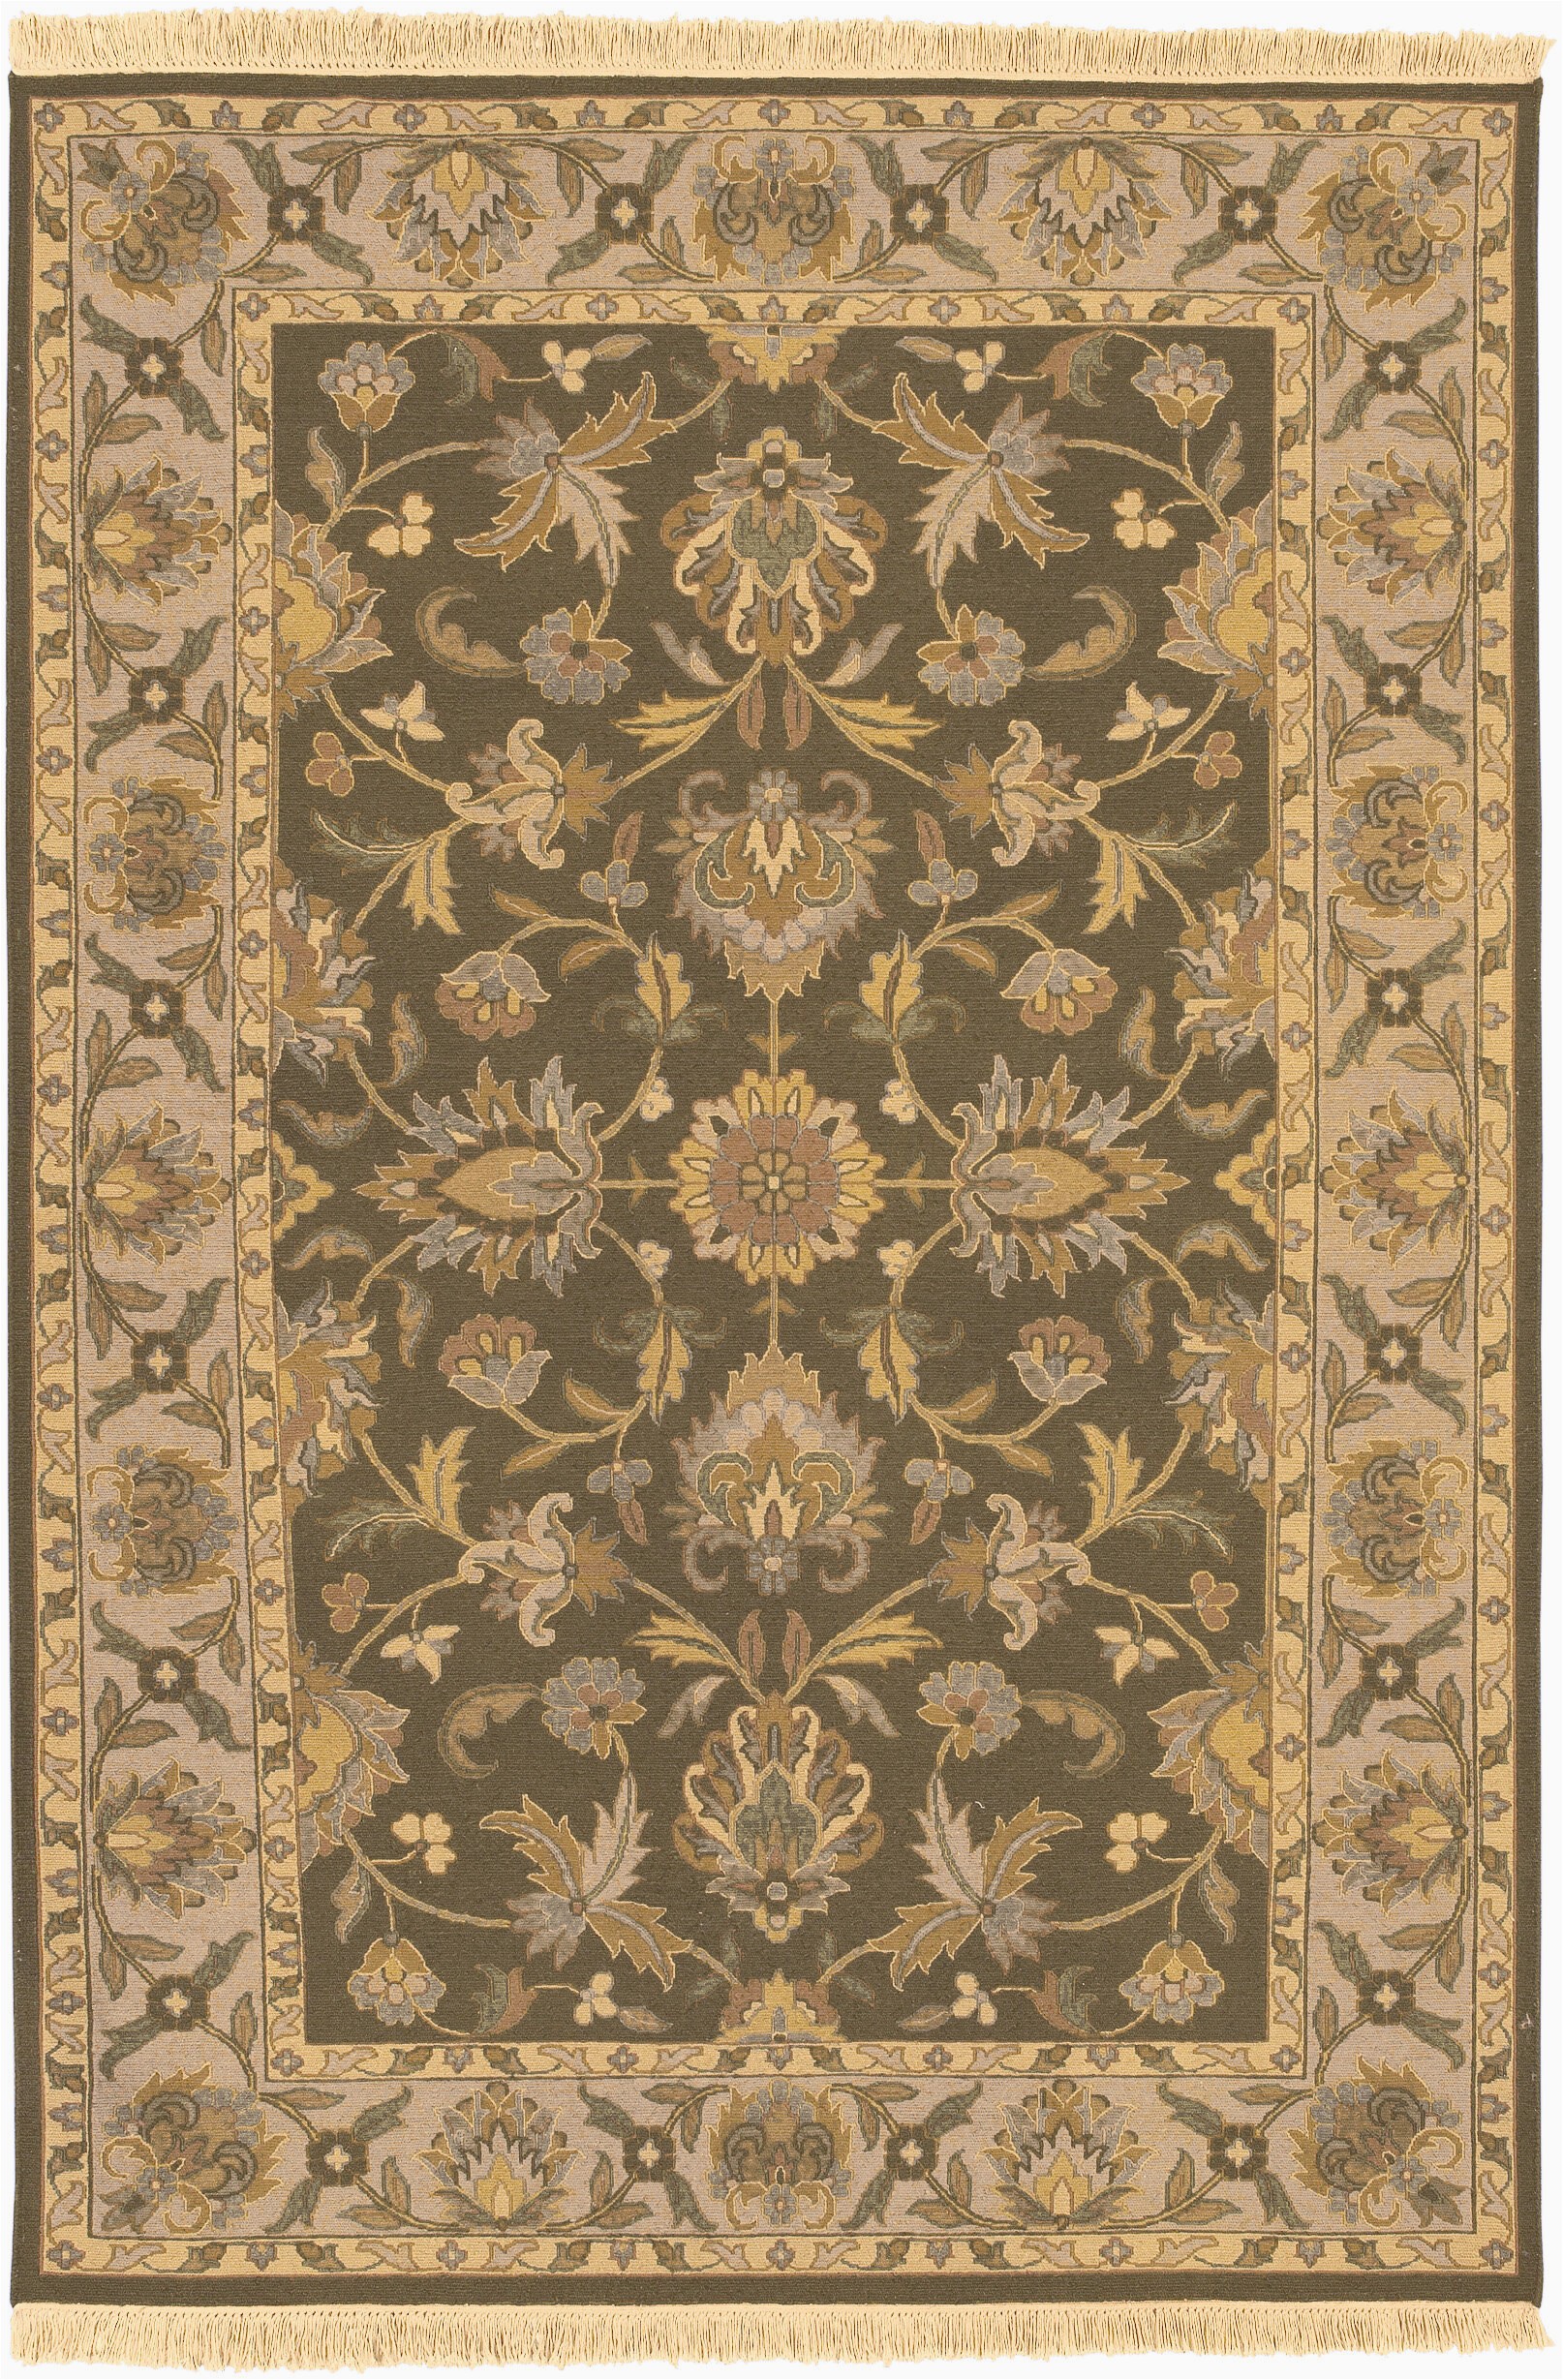 Gaines Hand Woven Natural area Rug by Charlton Home Worrall oriental Hand Knotted Wool area Rug